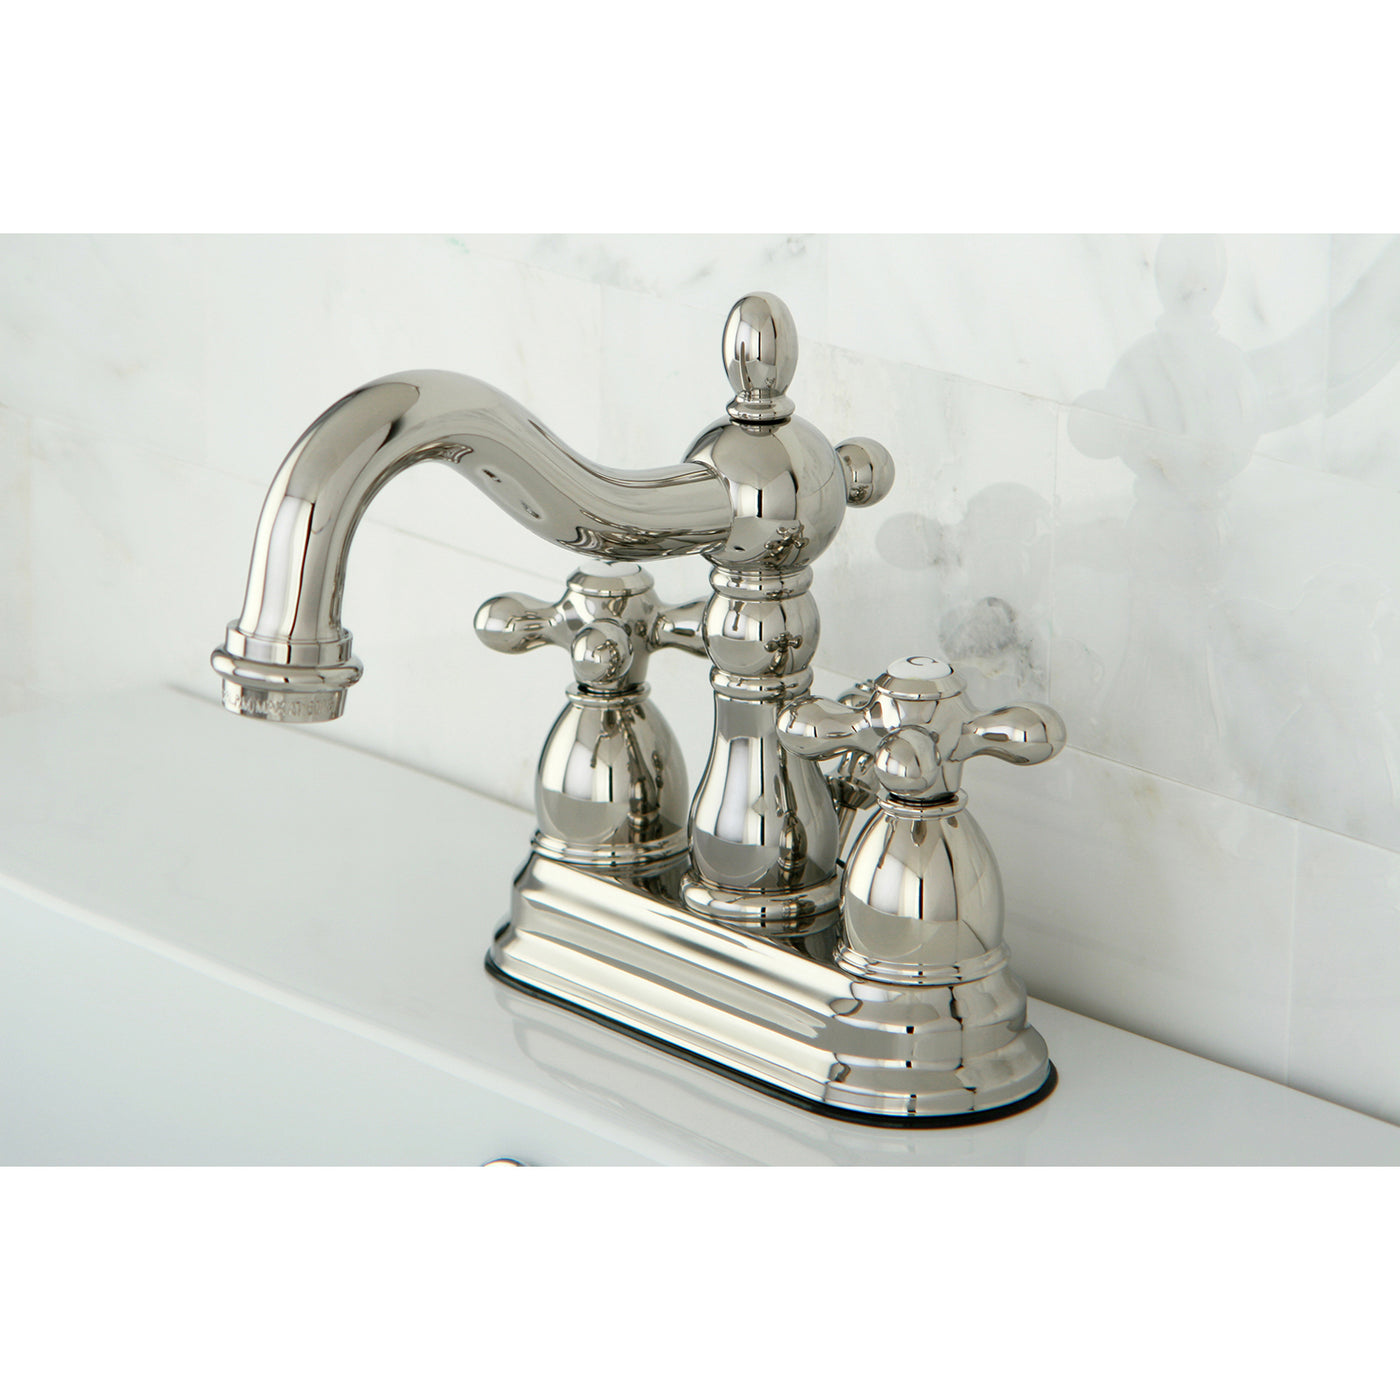 Elements of Design EB1606AX 4-Inch Centerset Bathroom Faucet with Plastic Pop-Up, Polished Nickel